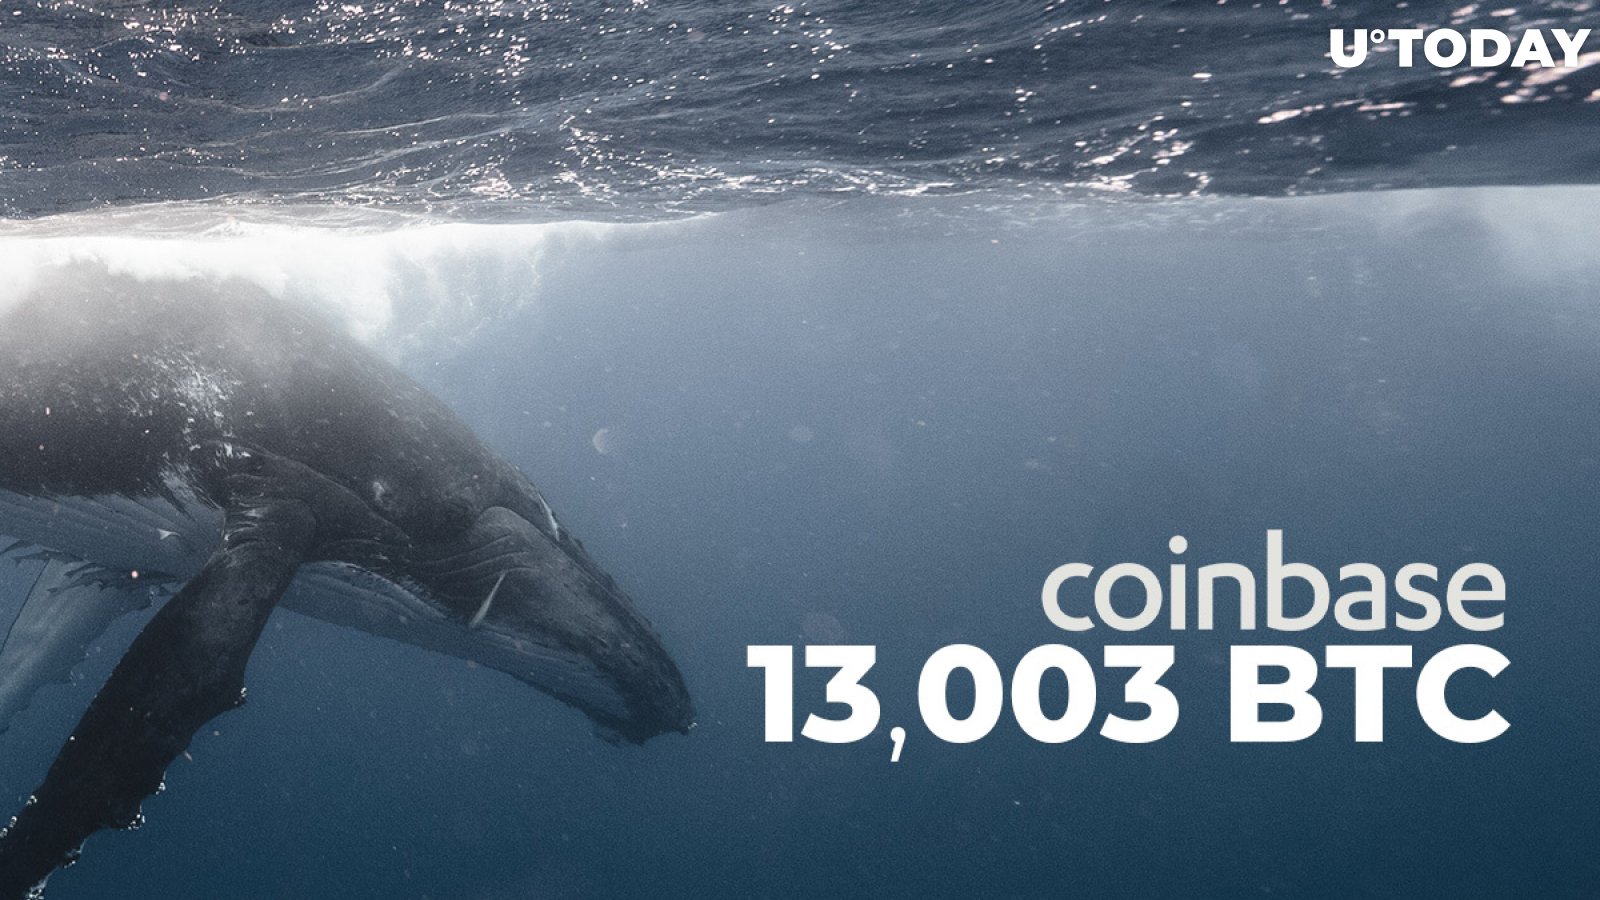 Coinbase Receives 13,003 BTC from Anonymous Whale Over Past 3 Hours